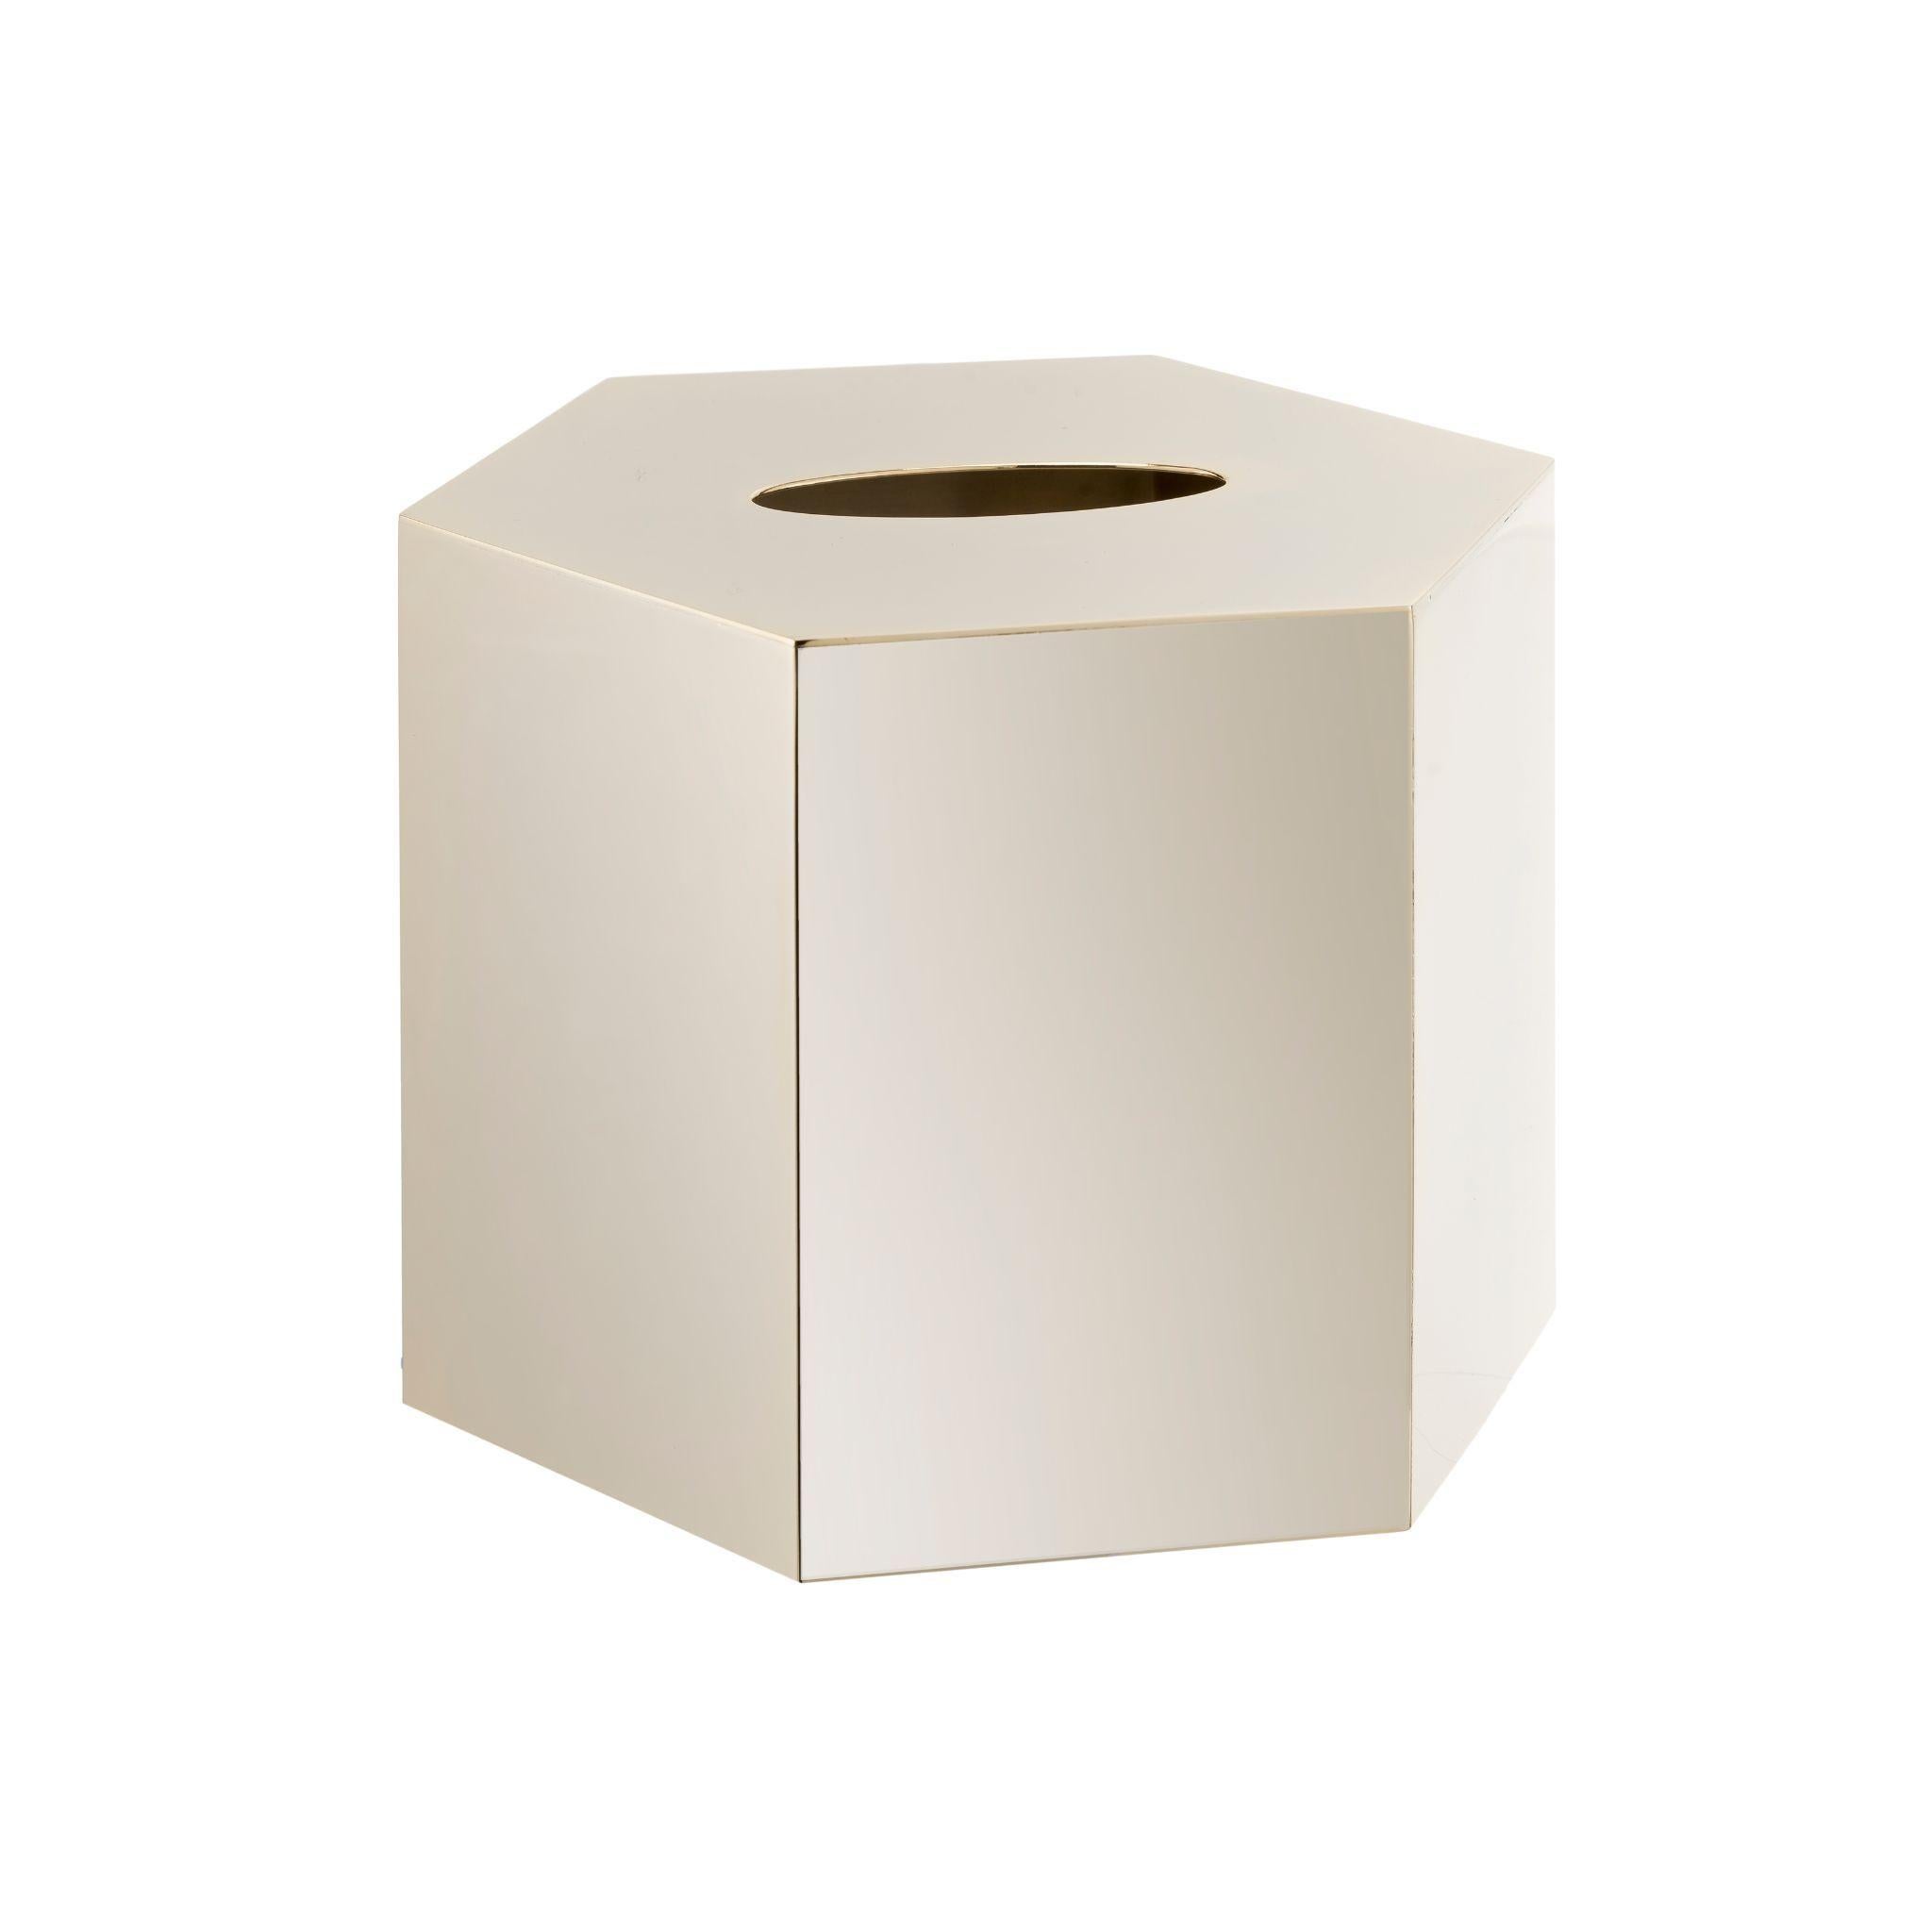 Add a touch of elegance to your home decor with our hexagonal brass kleenex box. Made from high-quality brass, its unique and stylish design adds sophistication to any space. Perfect for holding your tissues in style, it is a functional and